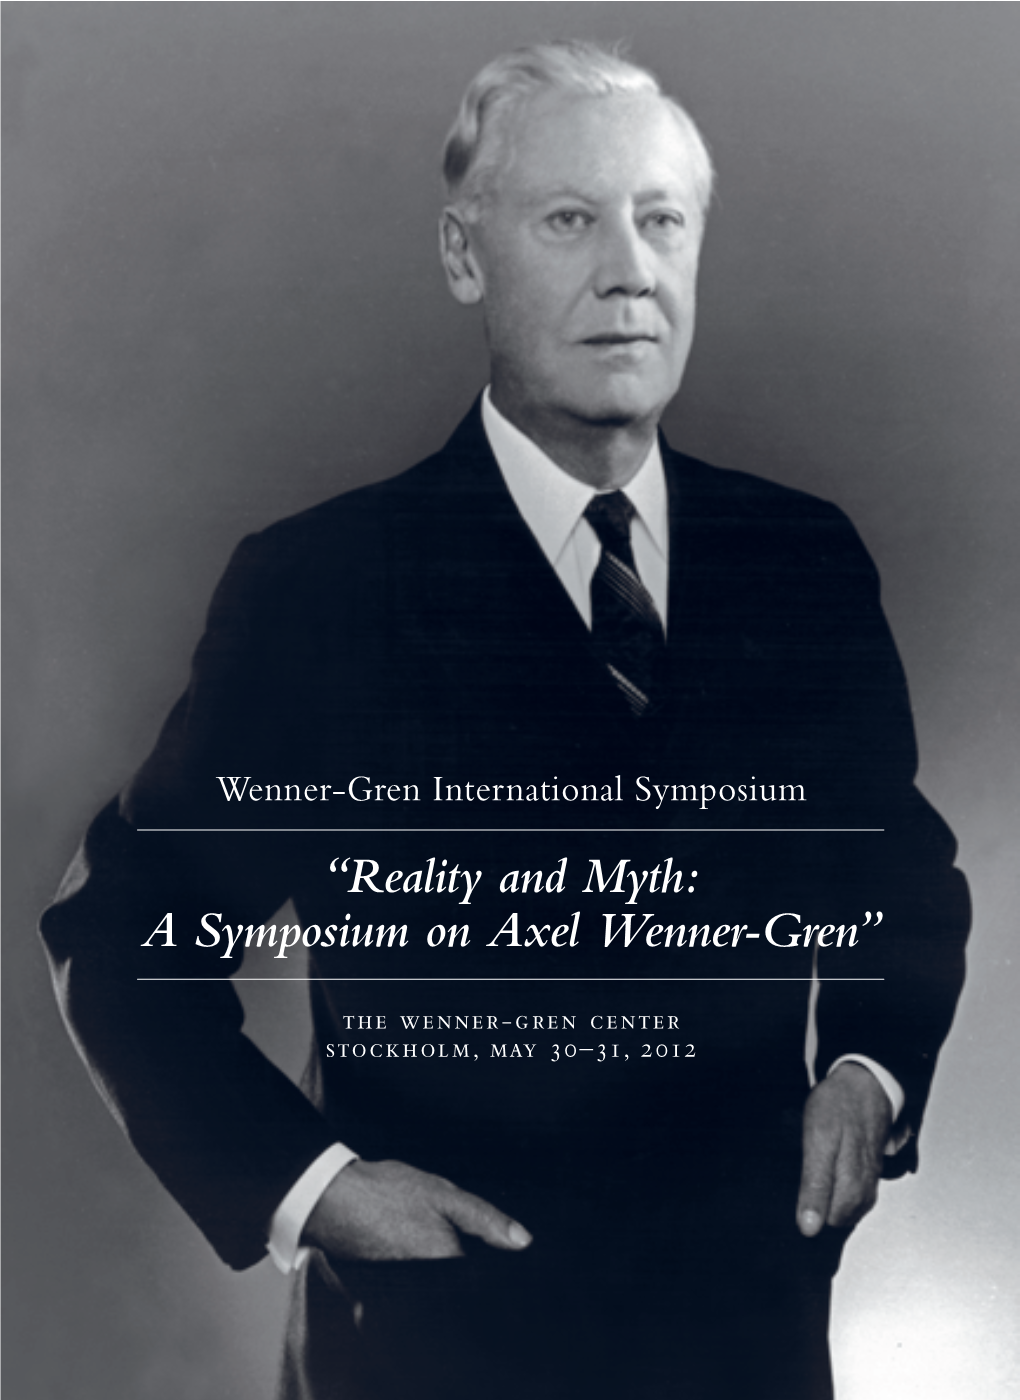 Reality and Myth: a Symposium on Axel Wenner-Gren